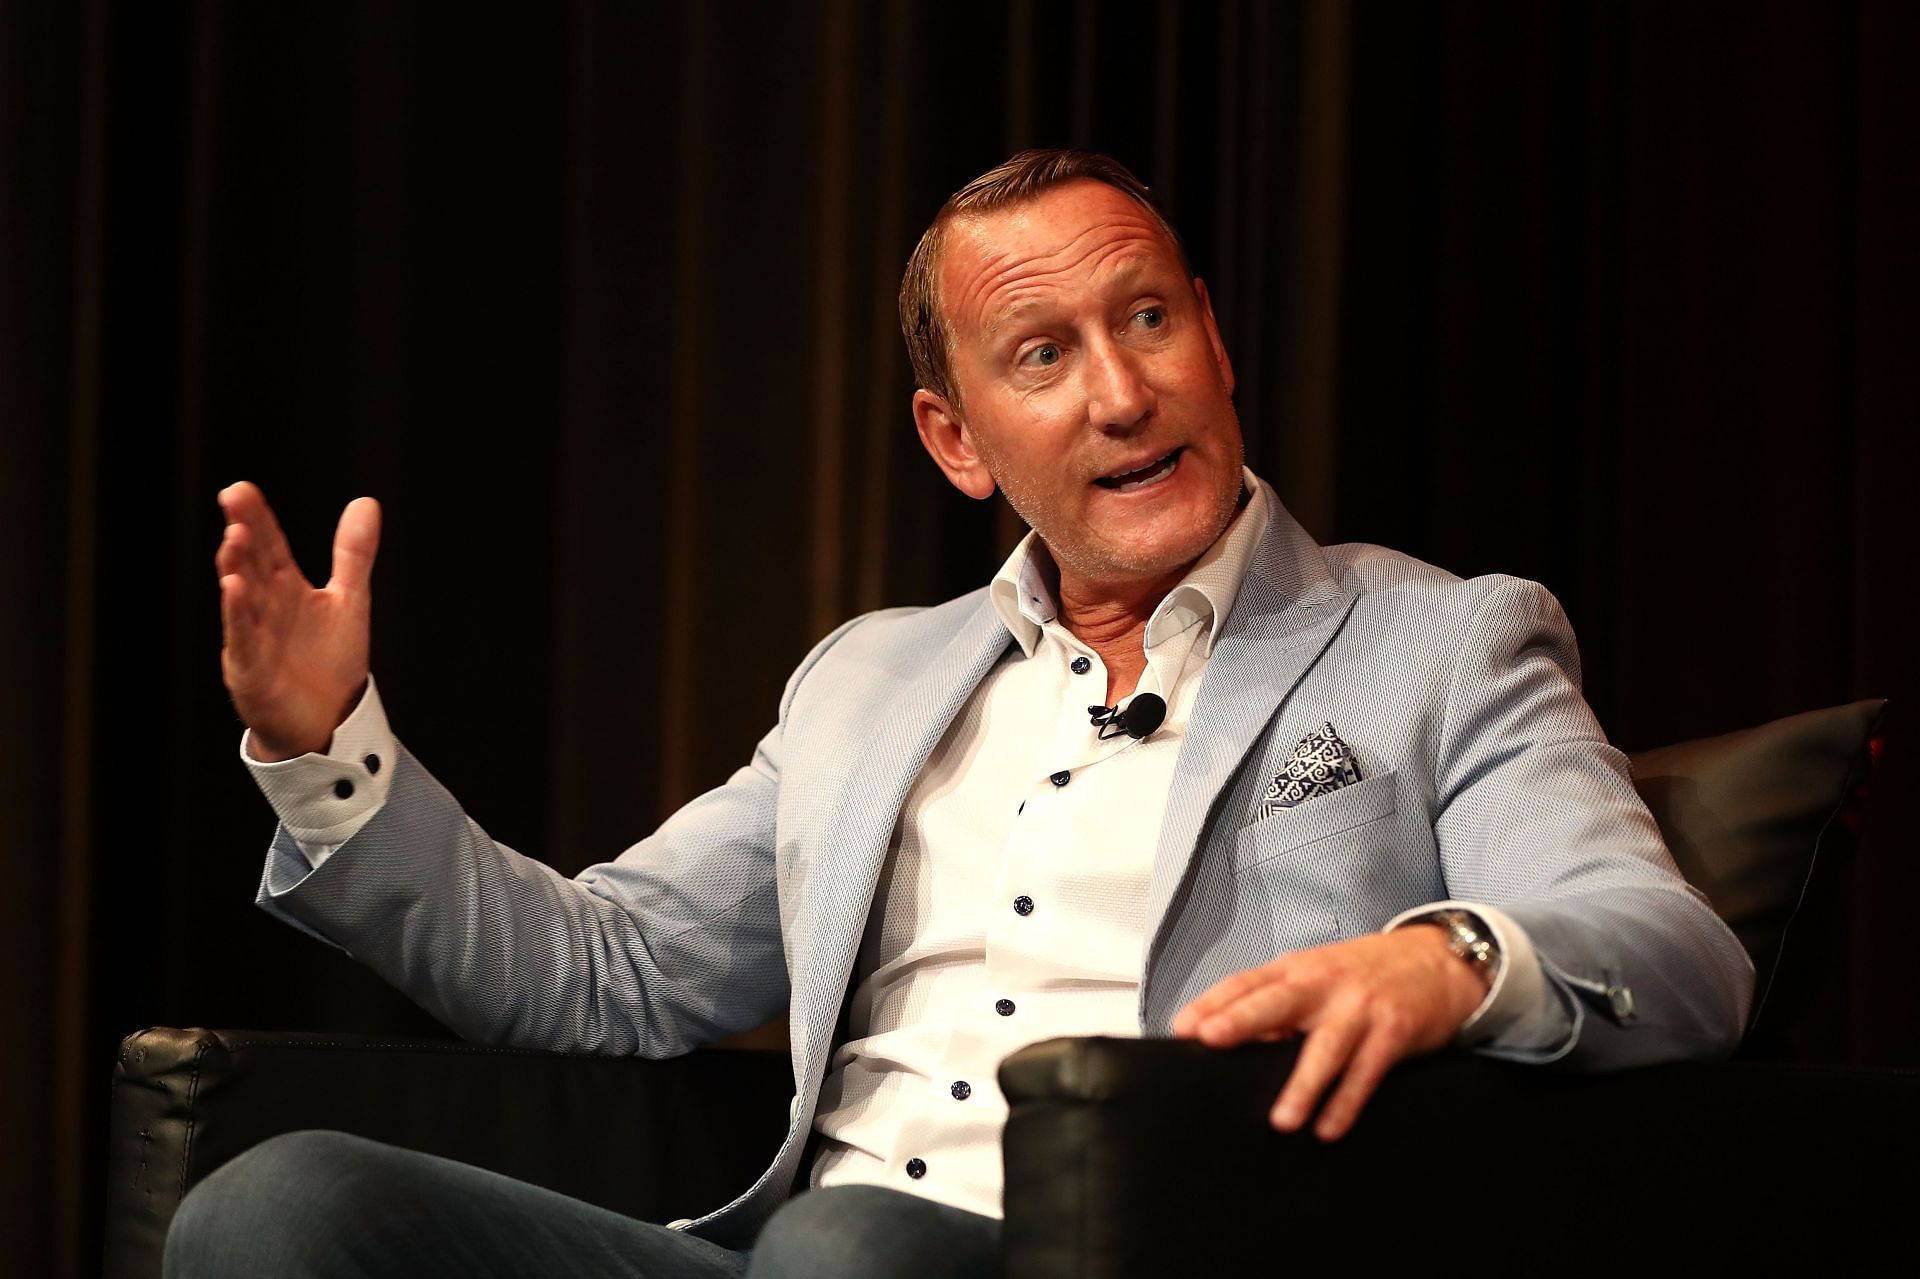 Ray Parlour believes his former team can finish third in the league next season.